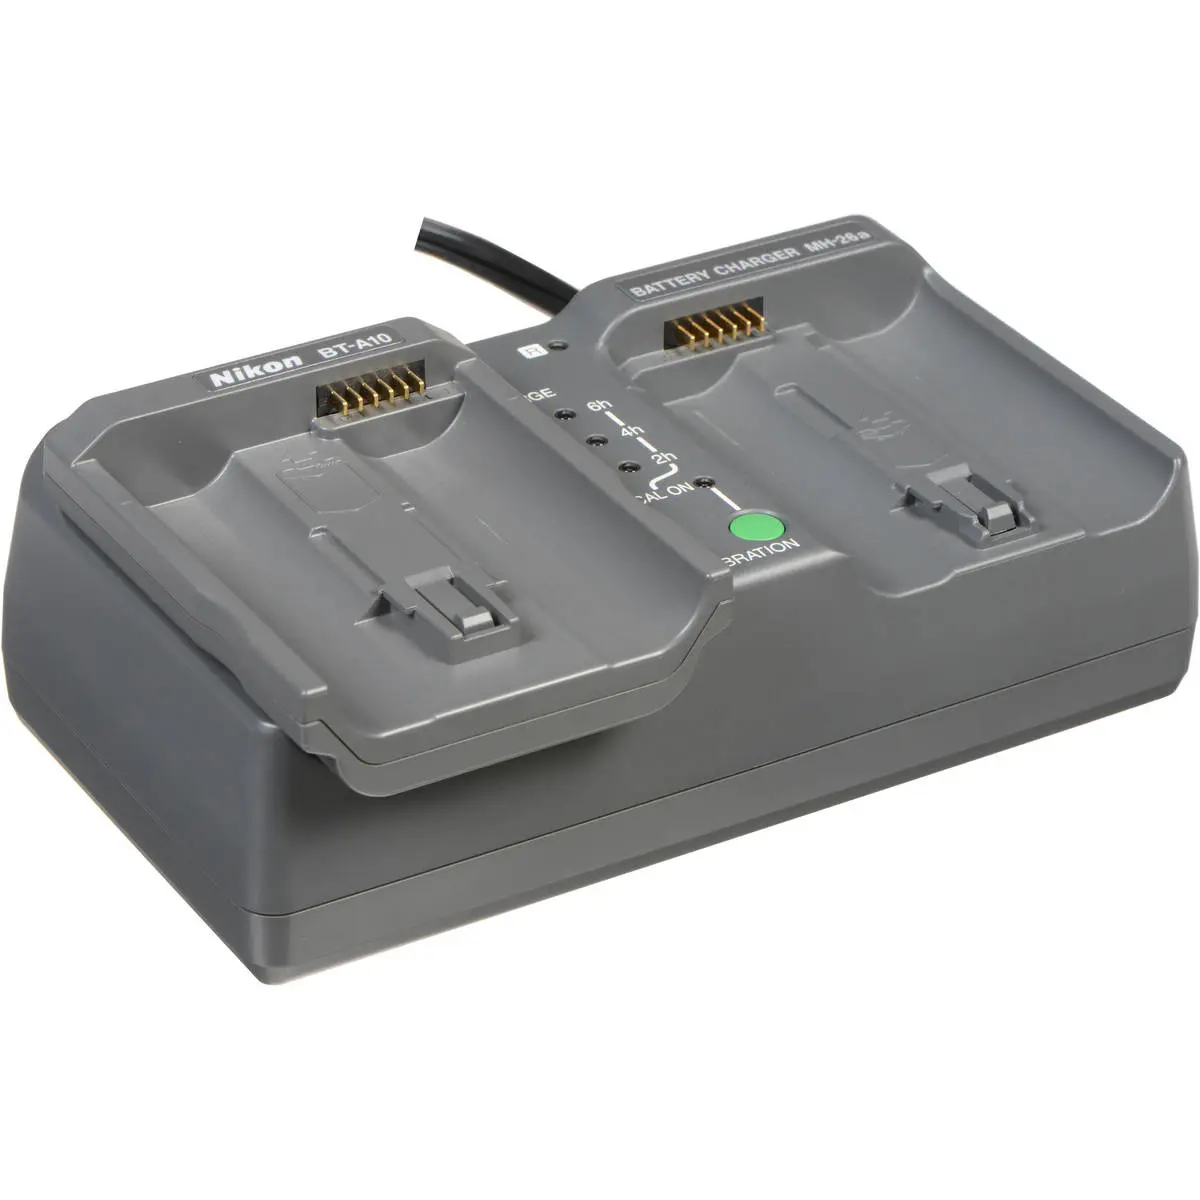 4. Nikon MH-26A Dual Battery Charger